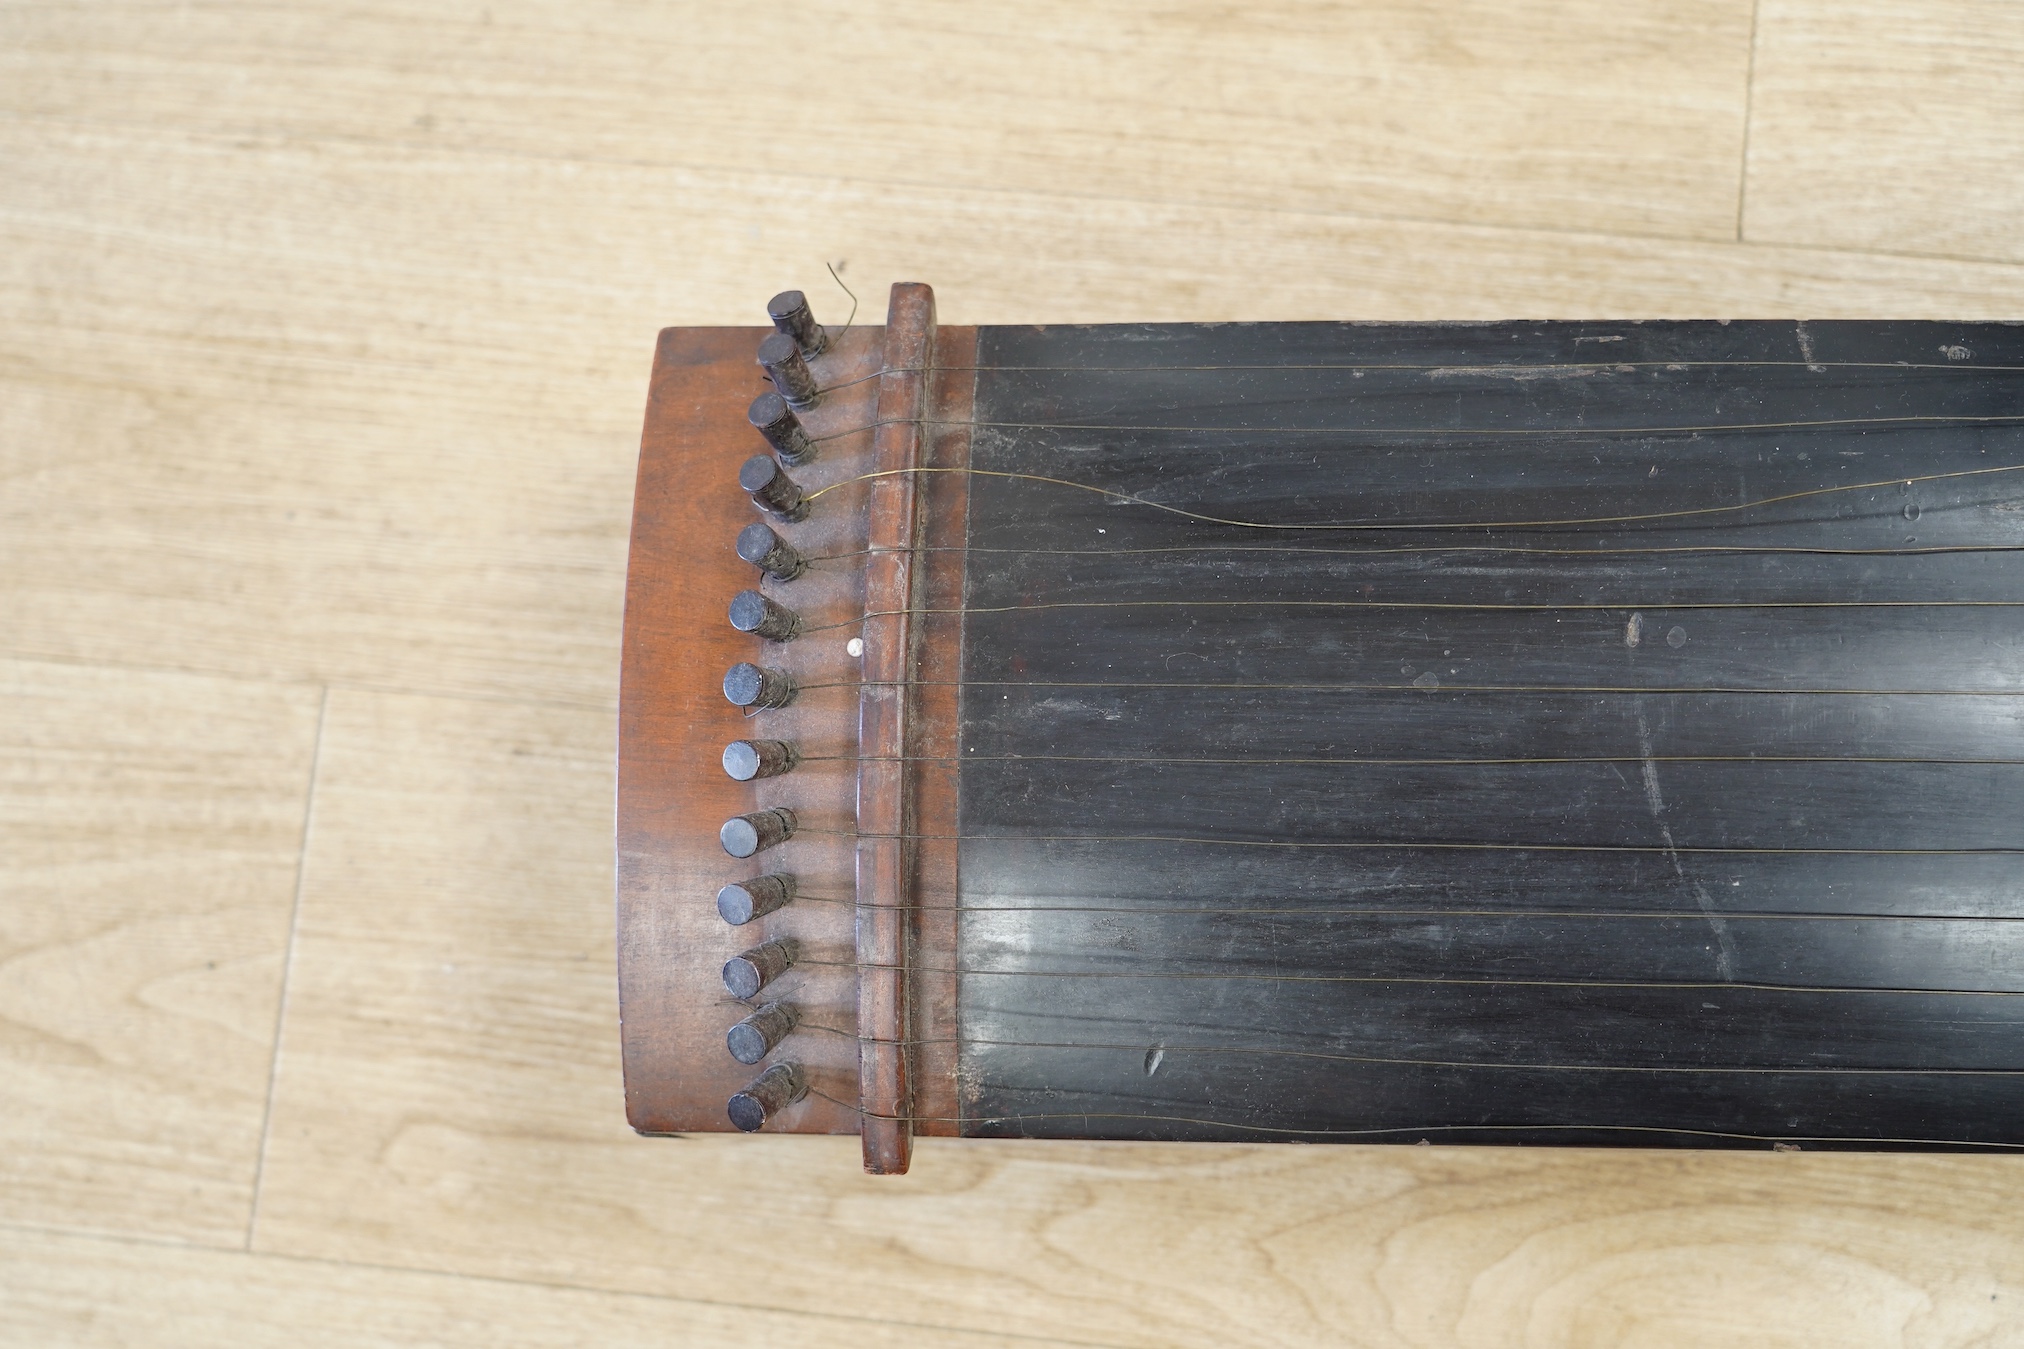 A Japanese Kato musical instrument with spares,19th century, 110cm long. Condition - fair, body of instrument and pegs have damage